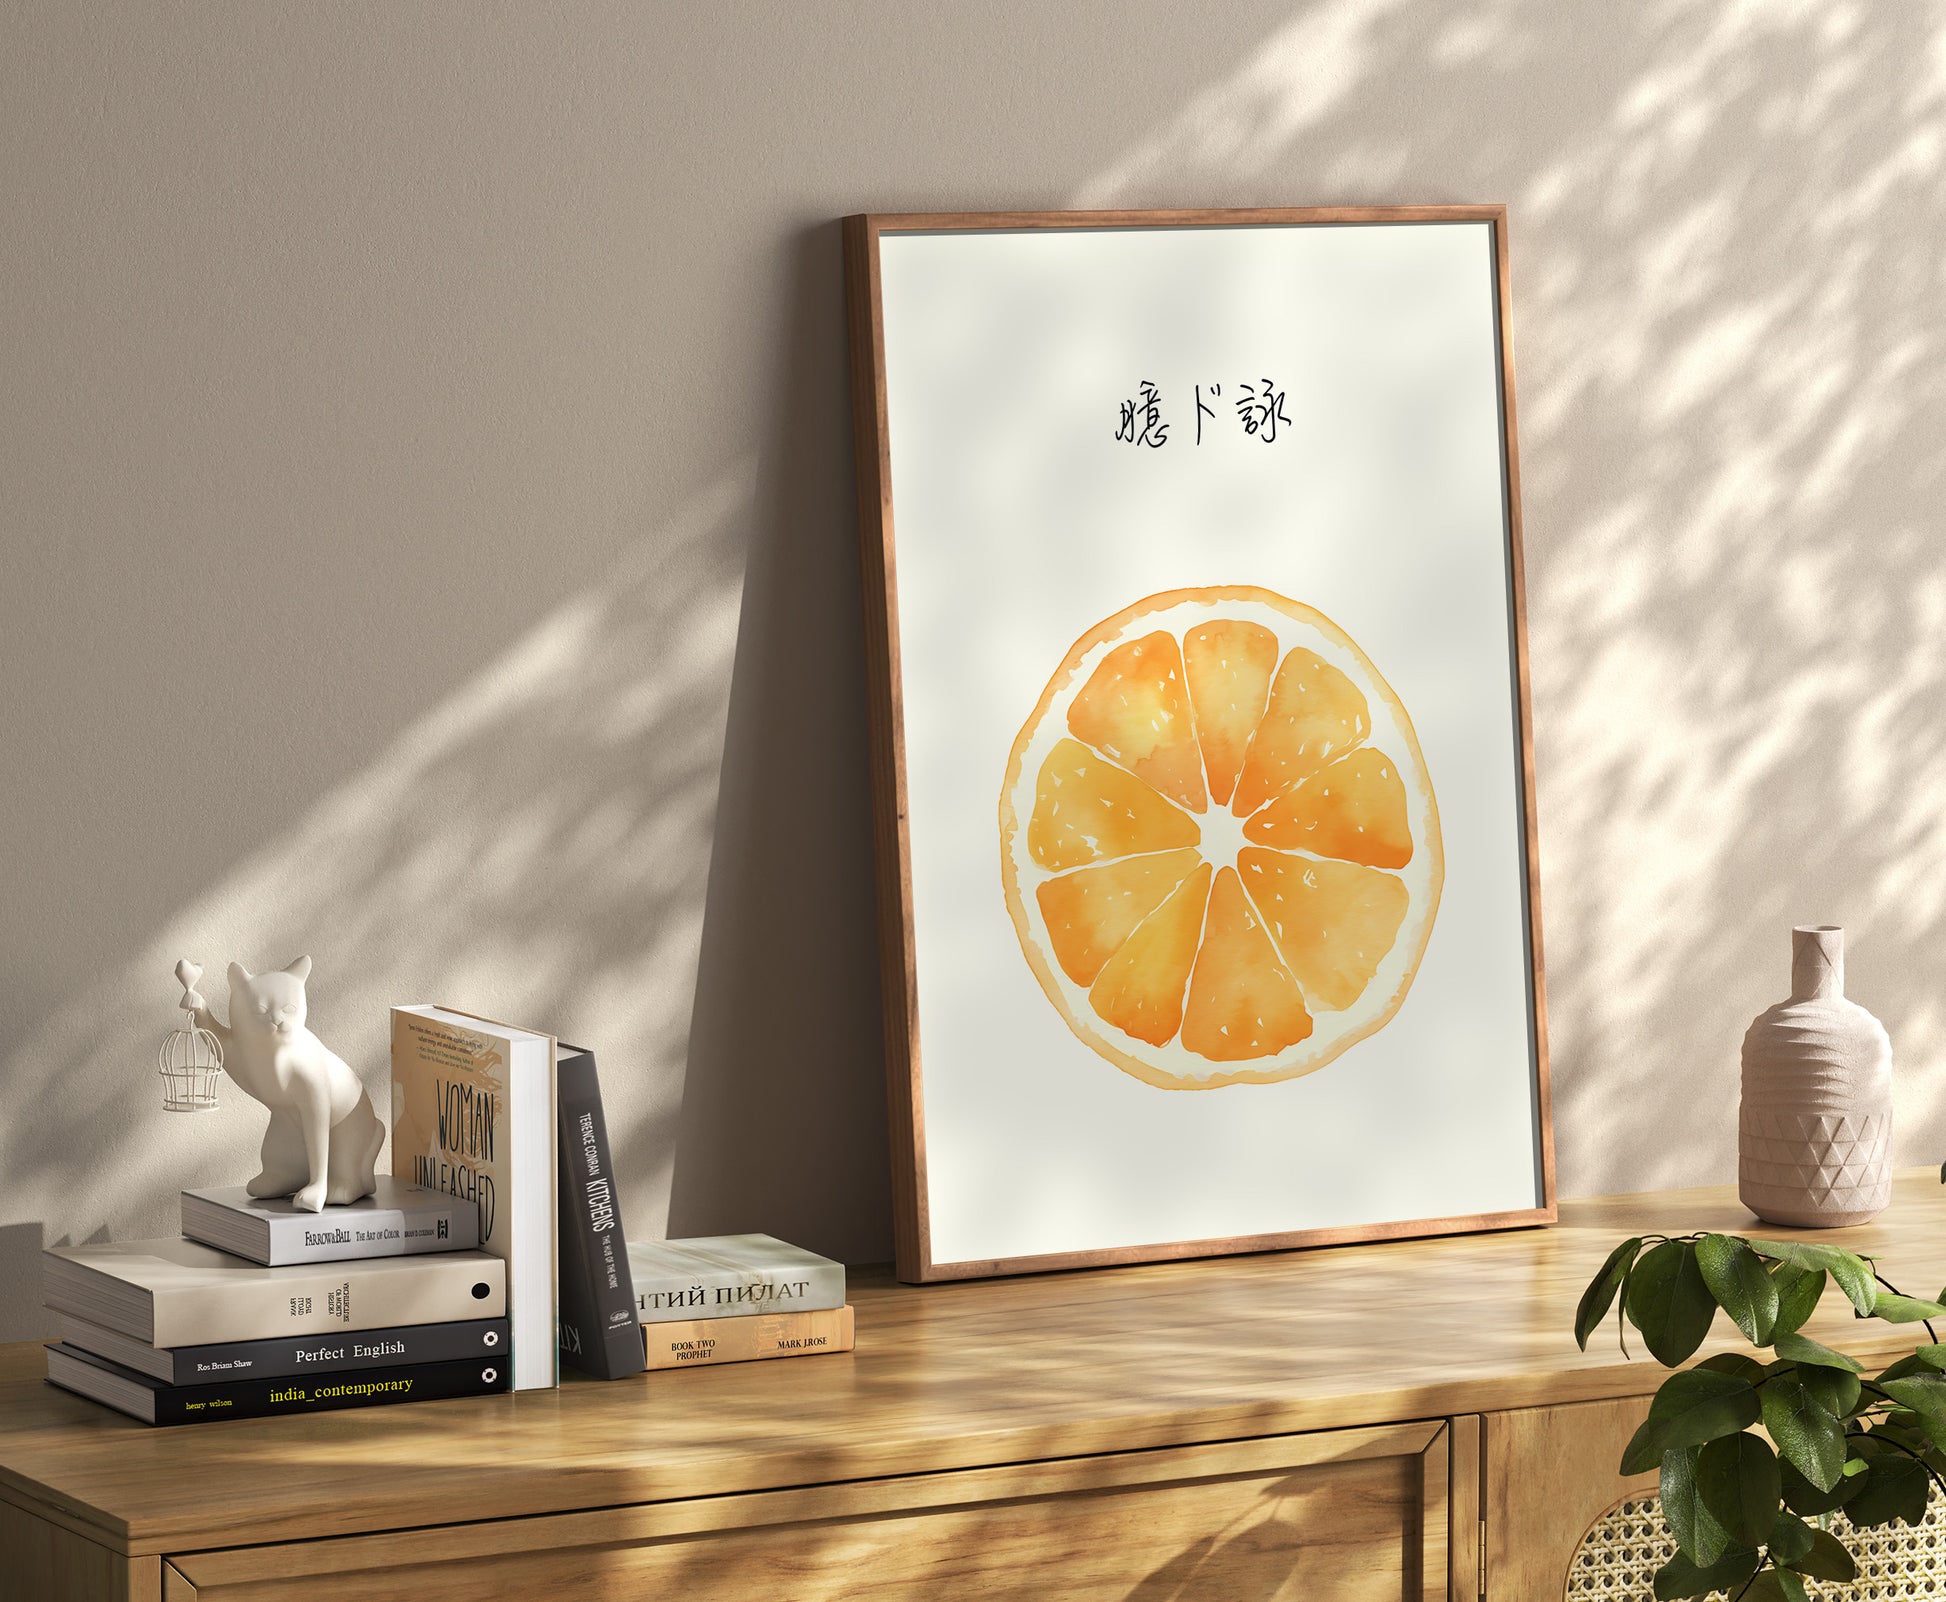 A framed poster of an orange slice on the floor leaning against a wall, beside a shelf with books and decor.